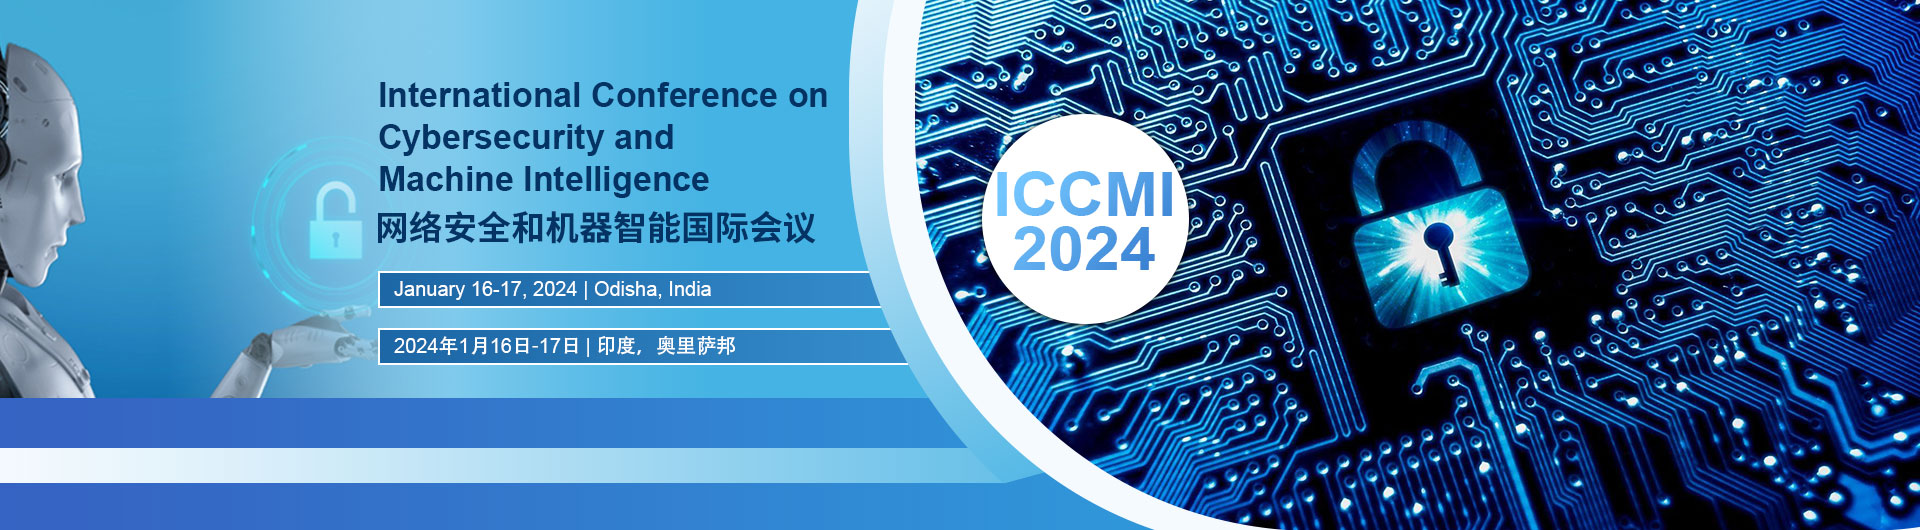 ICCMI2024International Conference on Cybersecurity and Machine